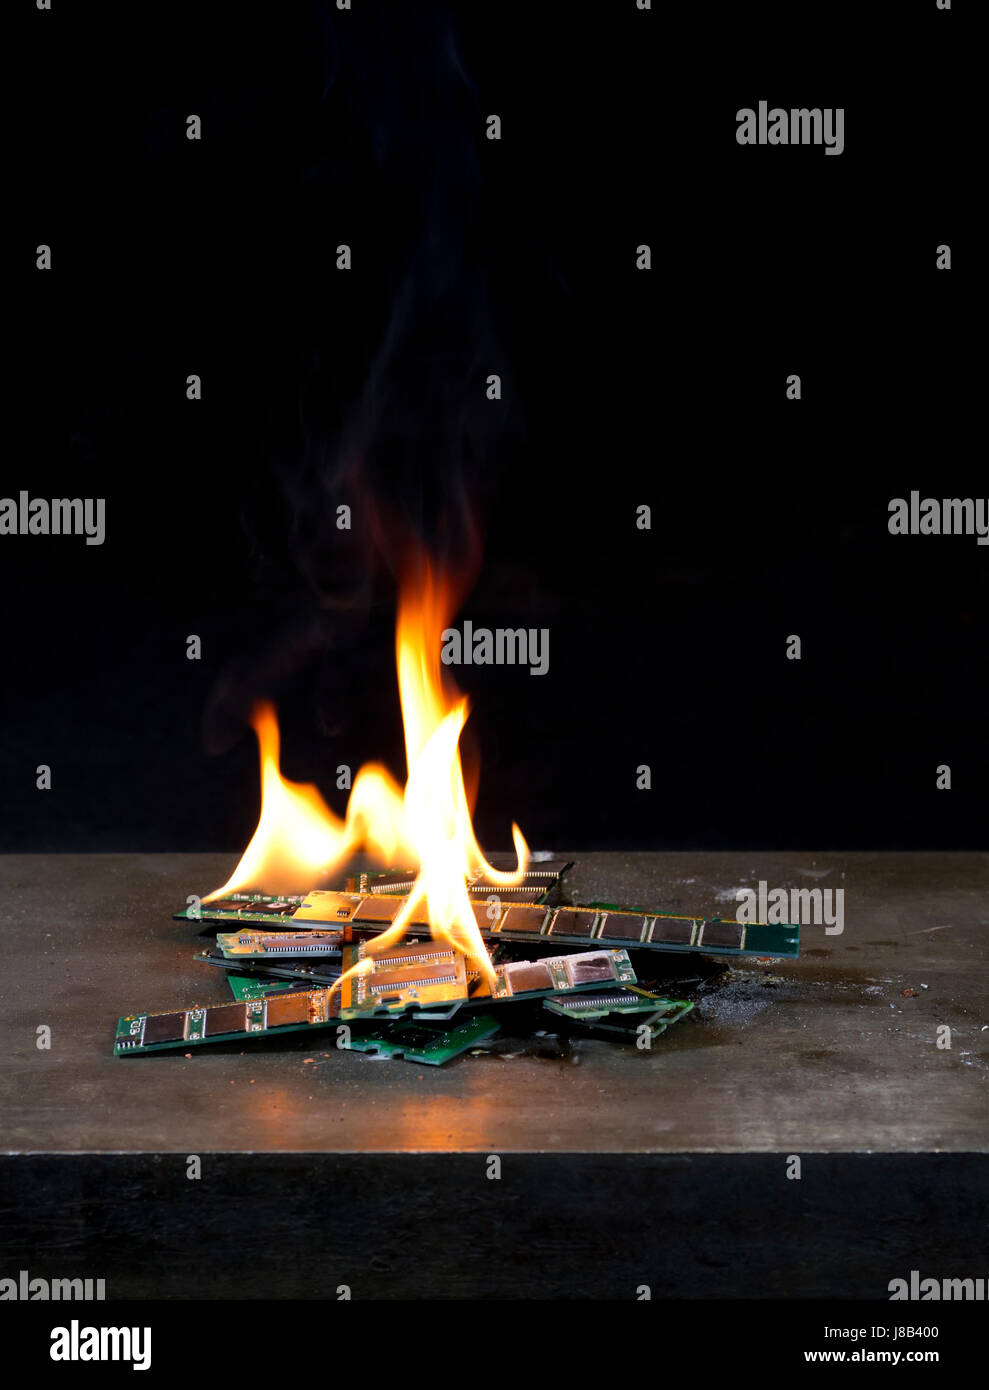 electronics, engineering, green, fire, conflagration, virtual memory, memory, Stock Photo